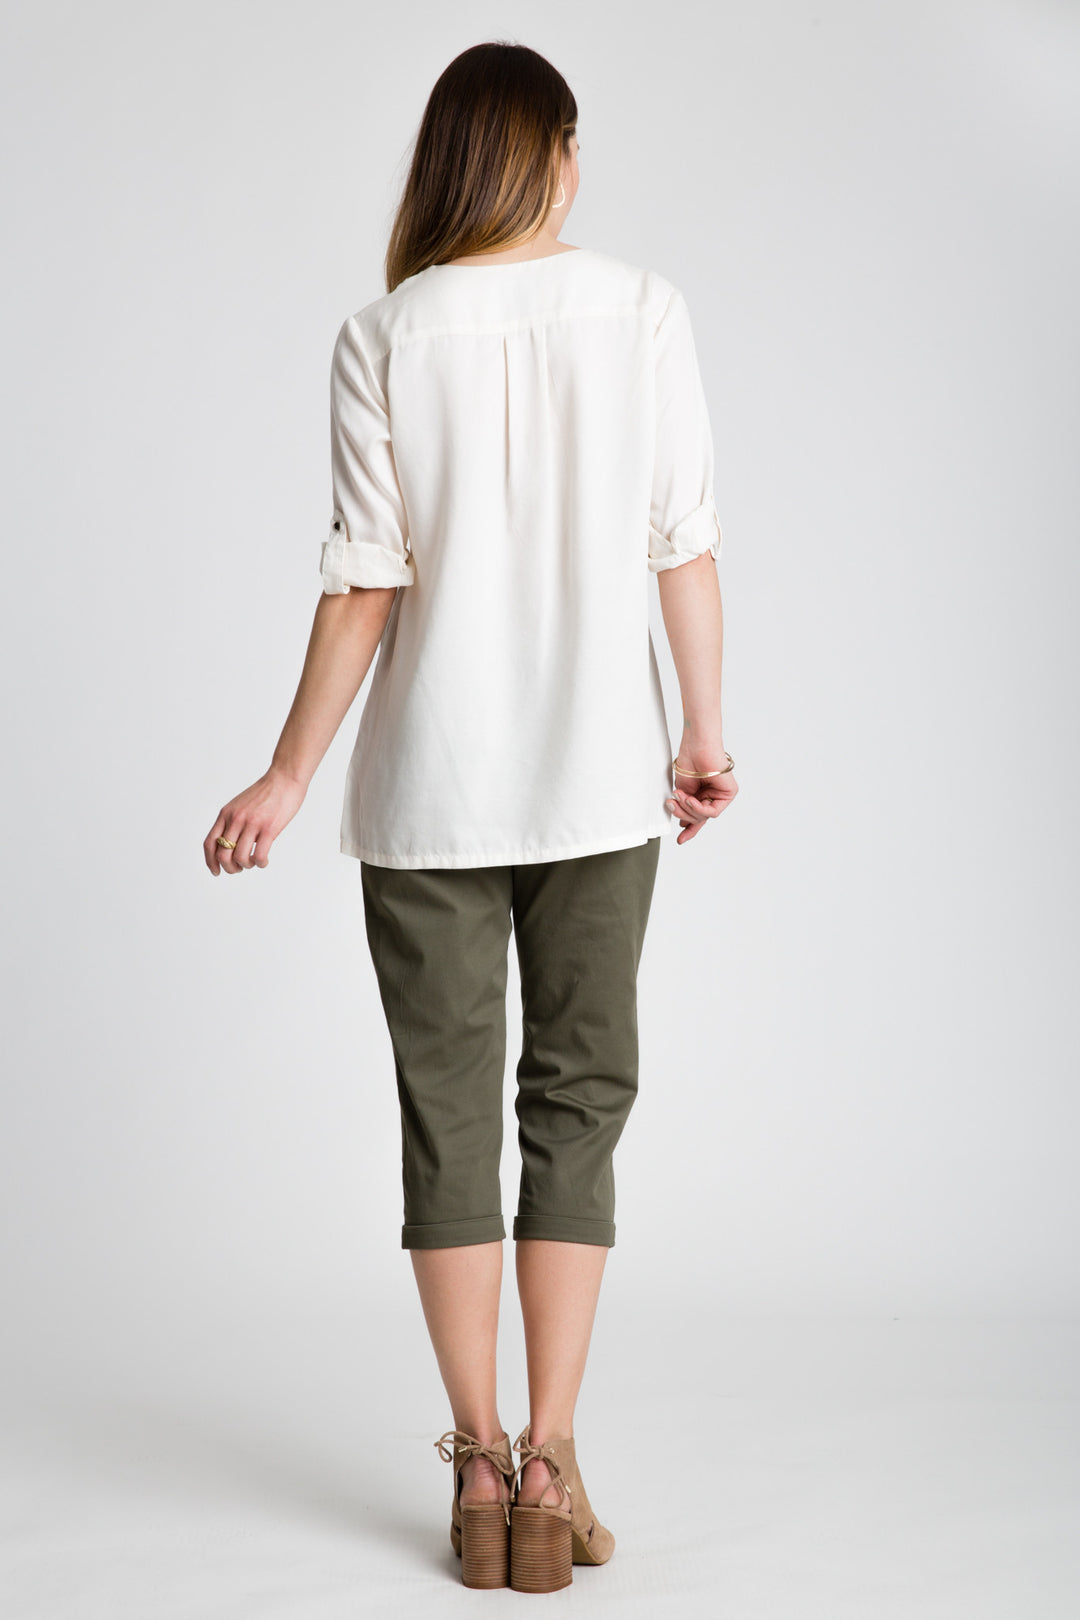 Lace-up Tunic Blouse - INTROclothing